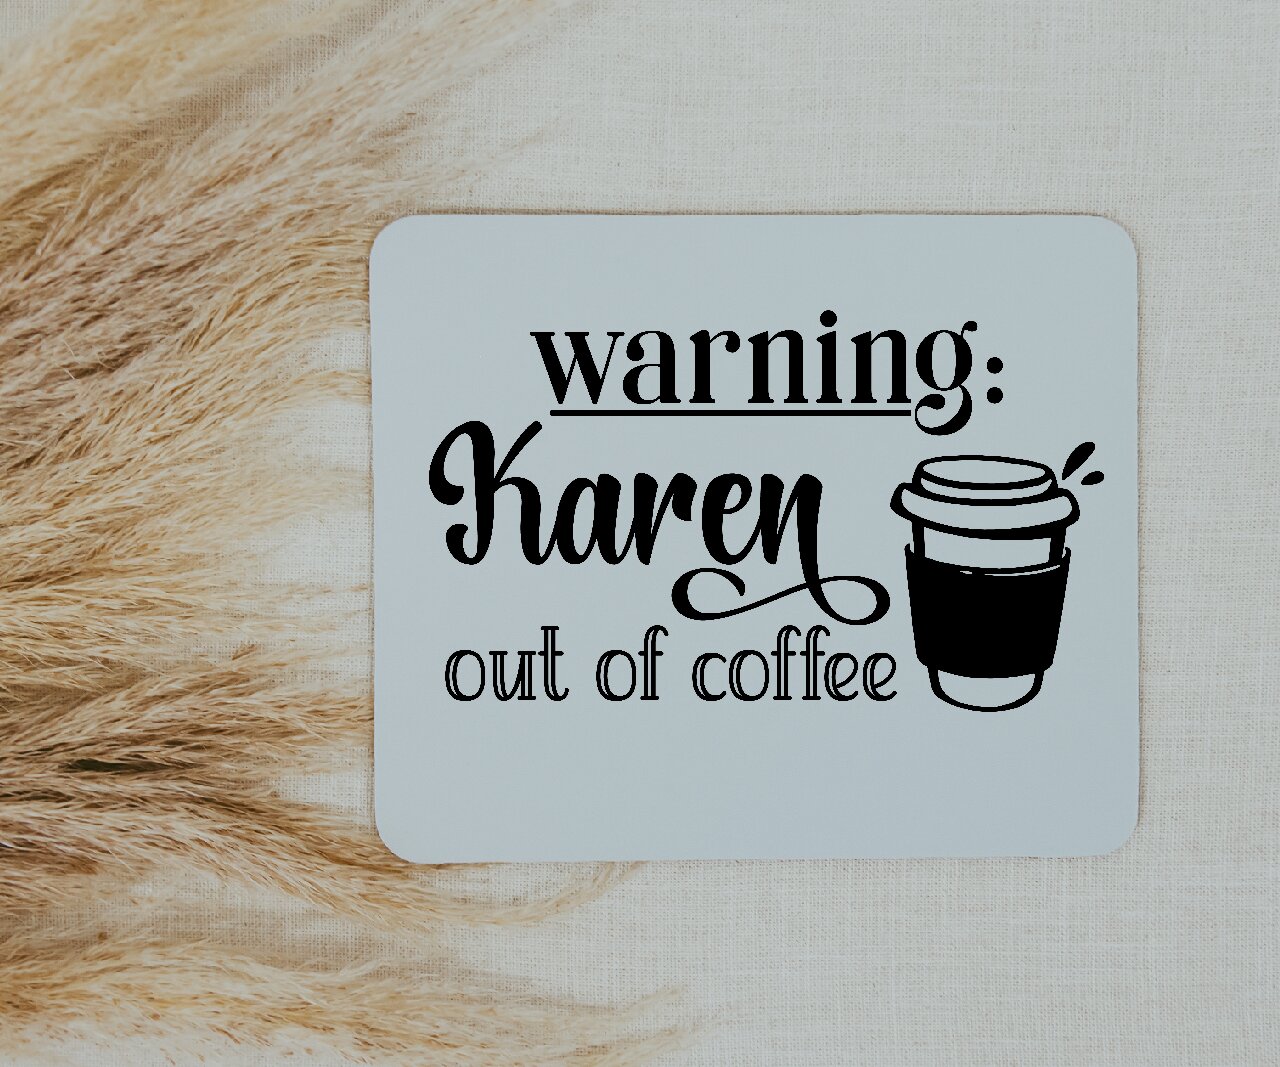 Warning: Karen Out Of Coffee - Mouse Pad